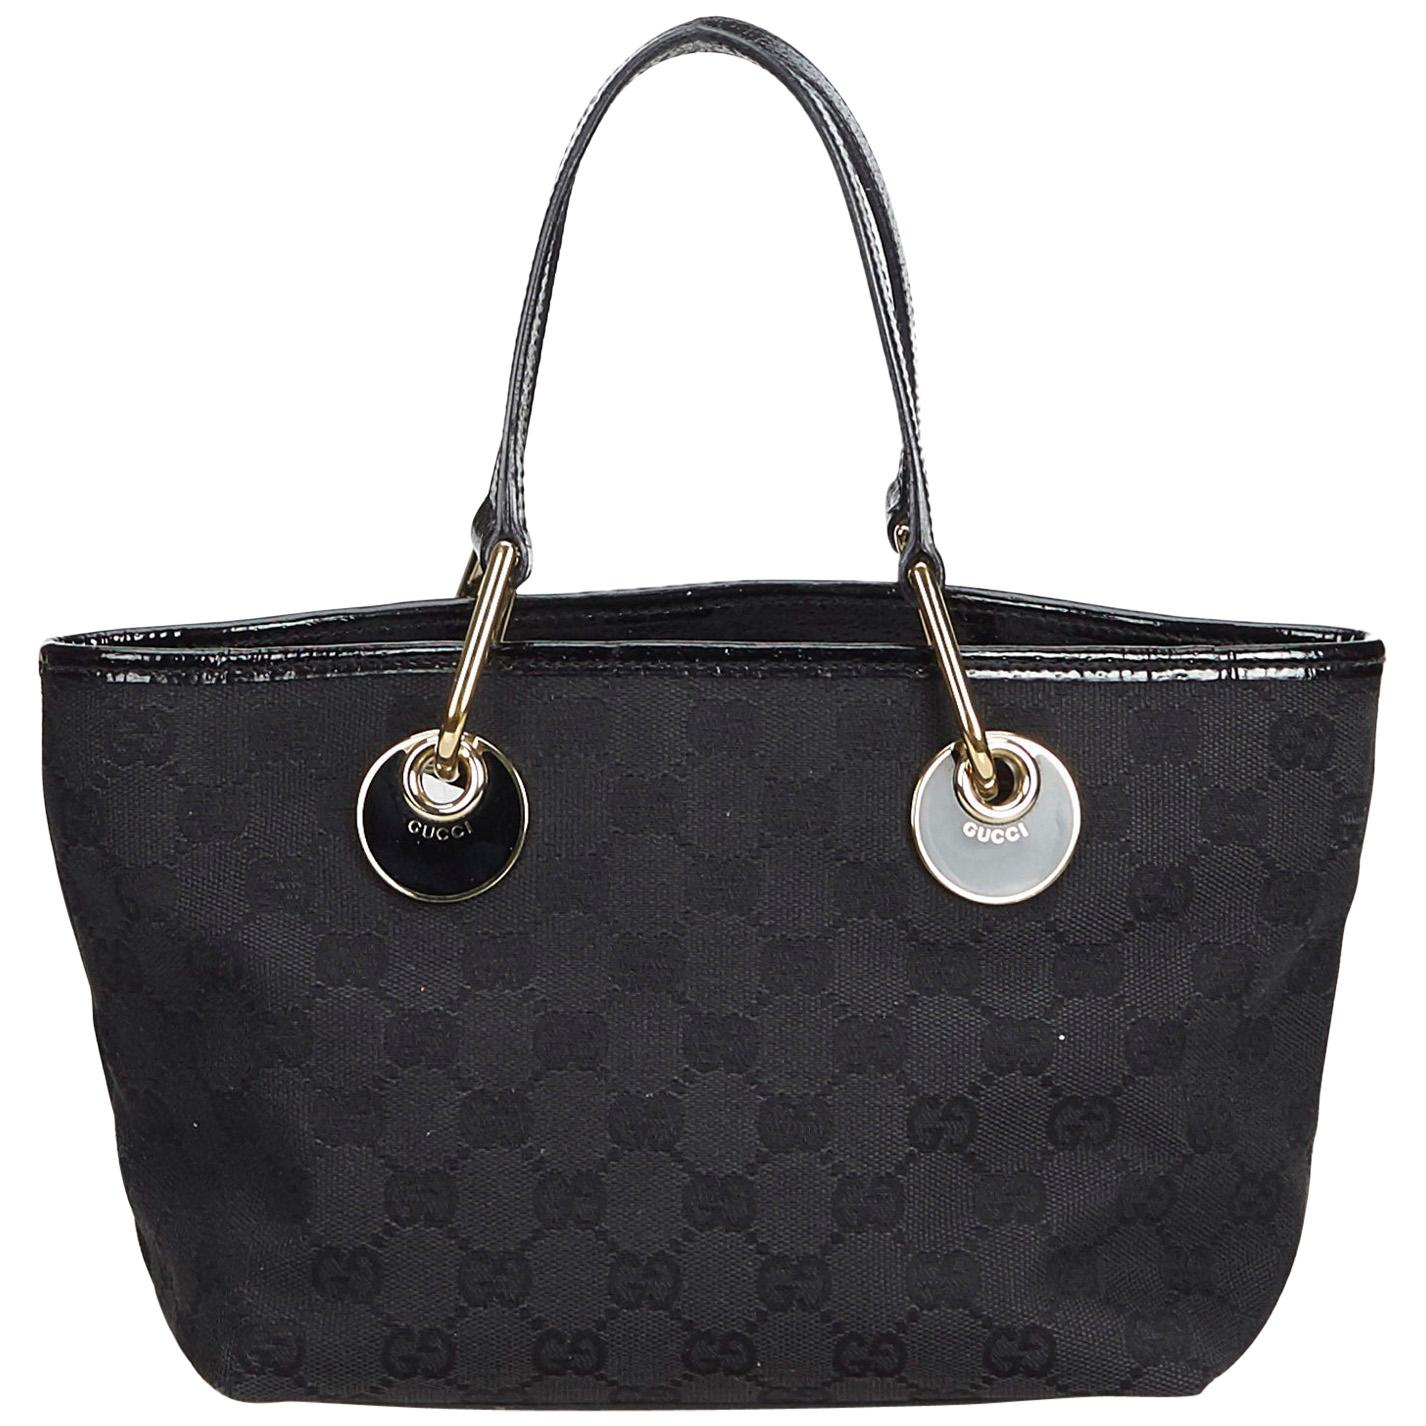 Gucci Black GG Canvas and Leather Tote